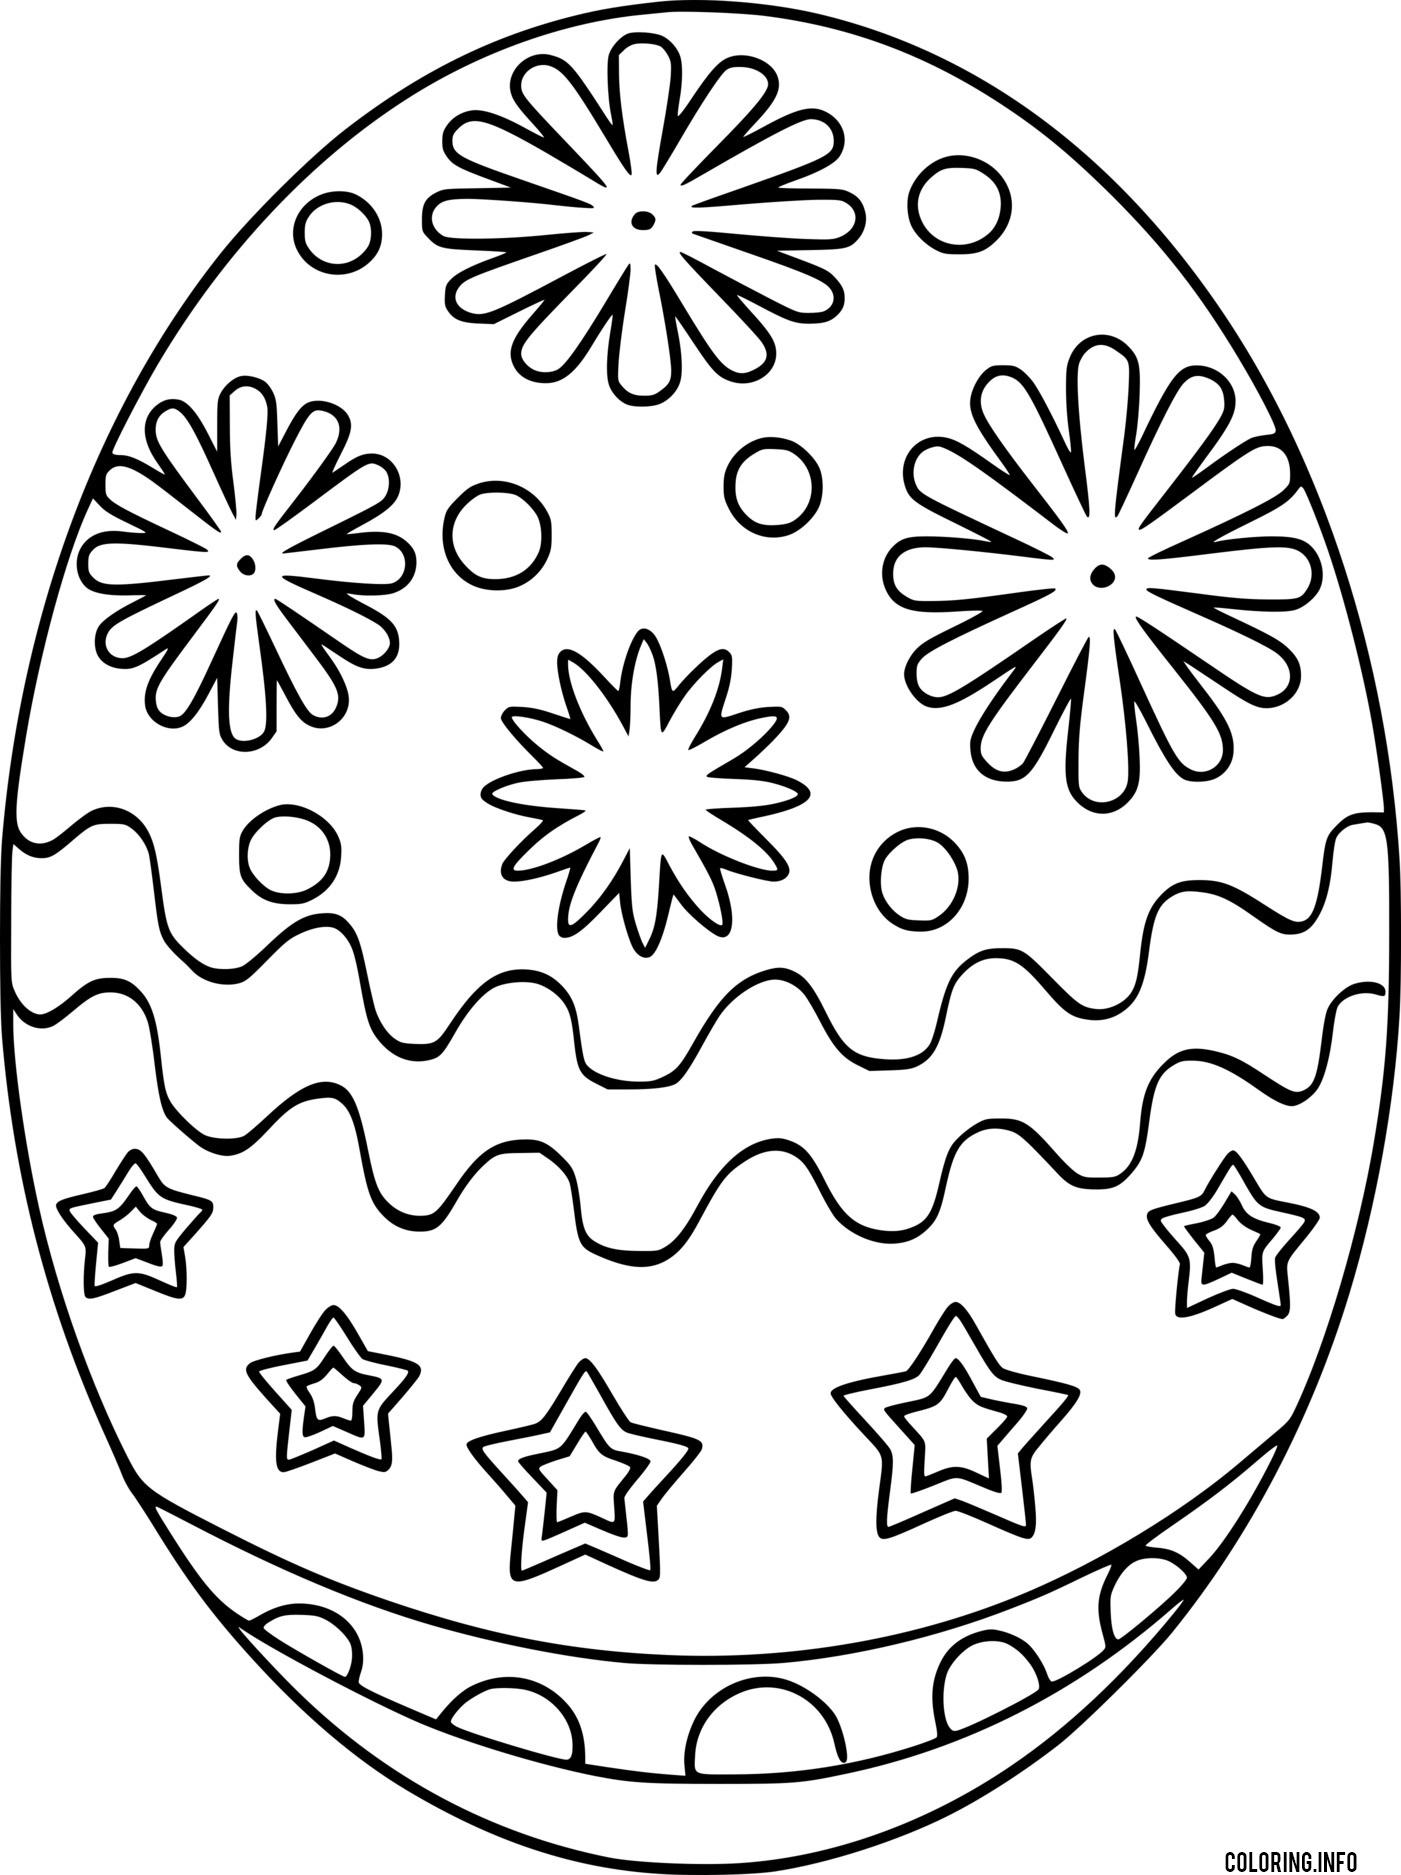 Easter Egg With Star And Flowers coloring